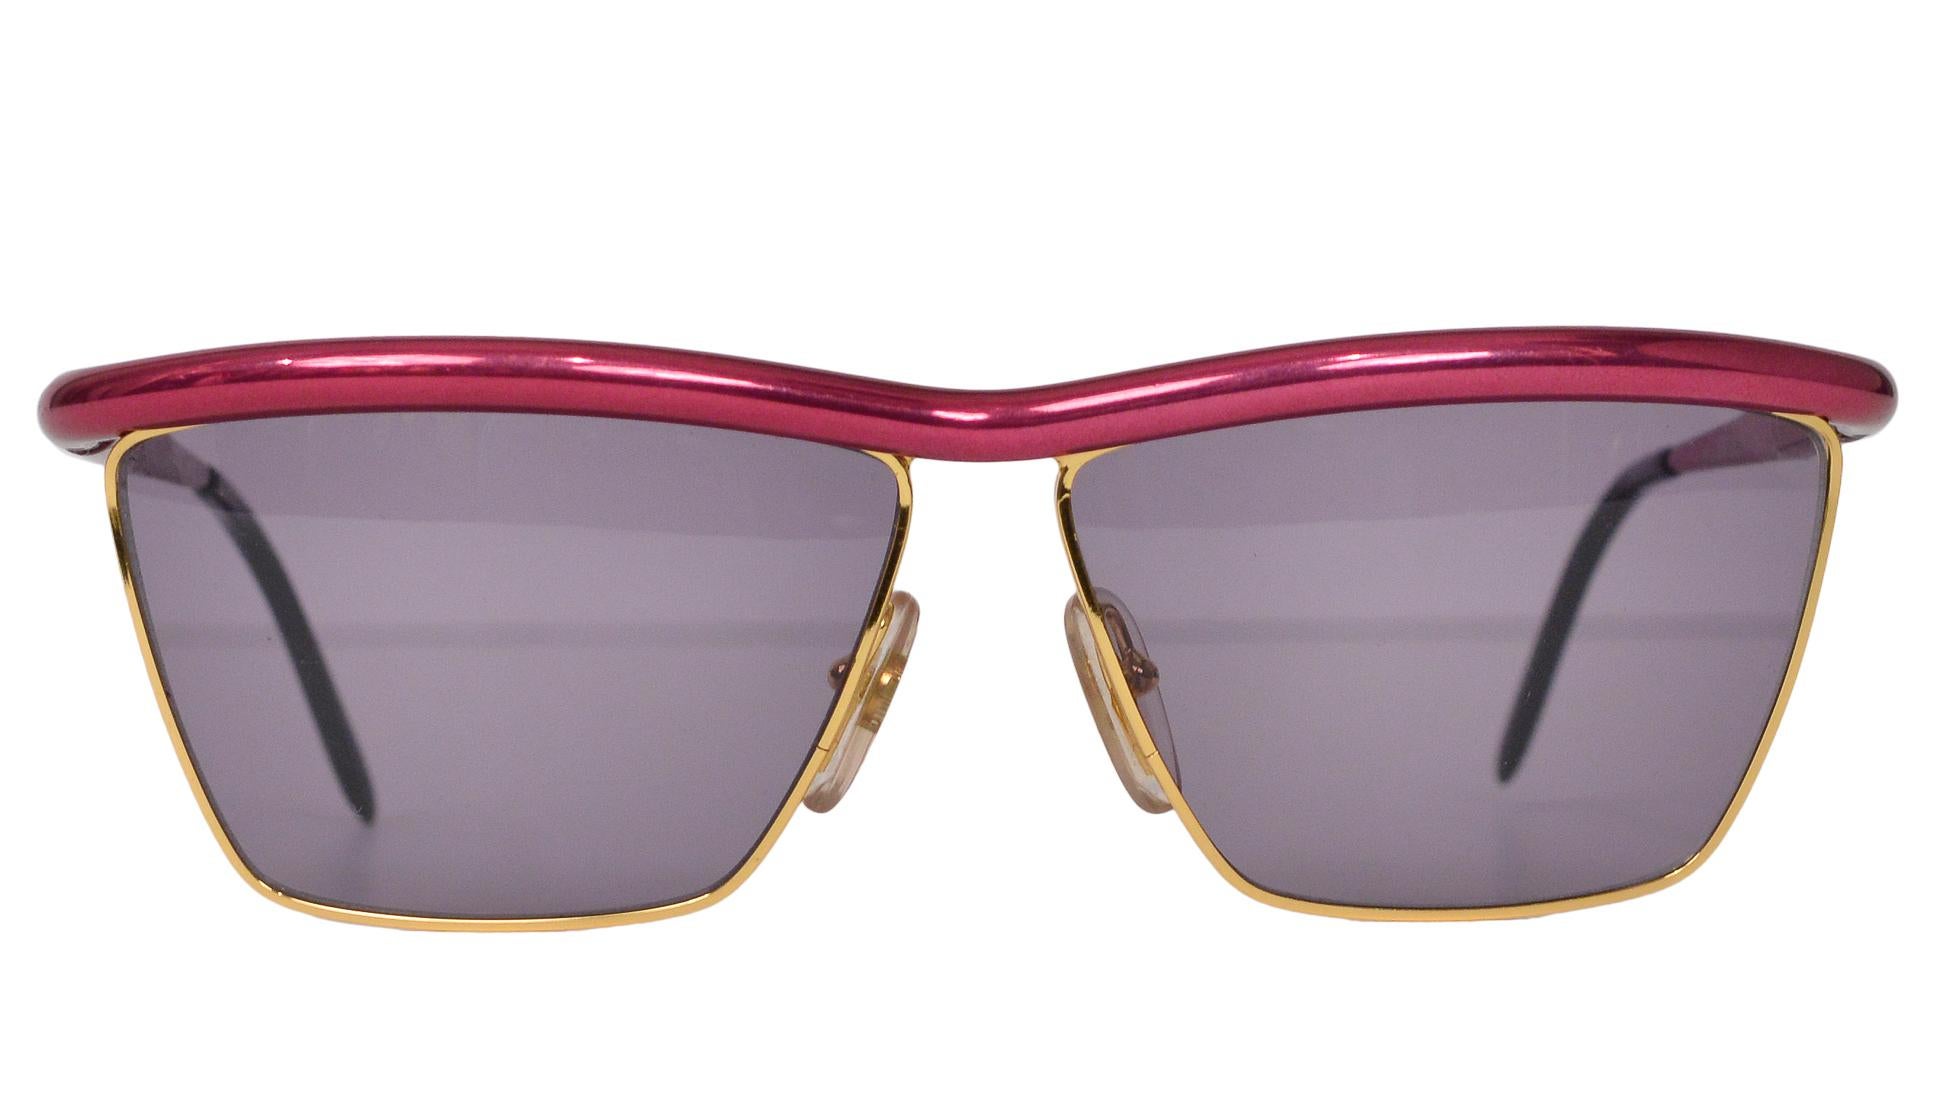 Resurrection Vintage is excited to offer a pair of vintage Gianfranco Ferré square gold-tone metal sunglasses featuring a metallic pink brow bar and smoky lenses. 

Gianfranco Ferré
Made in Italy
Excellent Vintage Condition 
Authenticity Guaranteed 